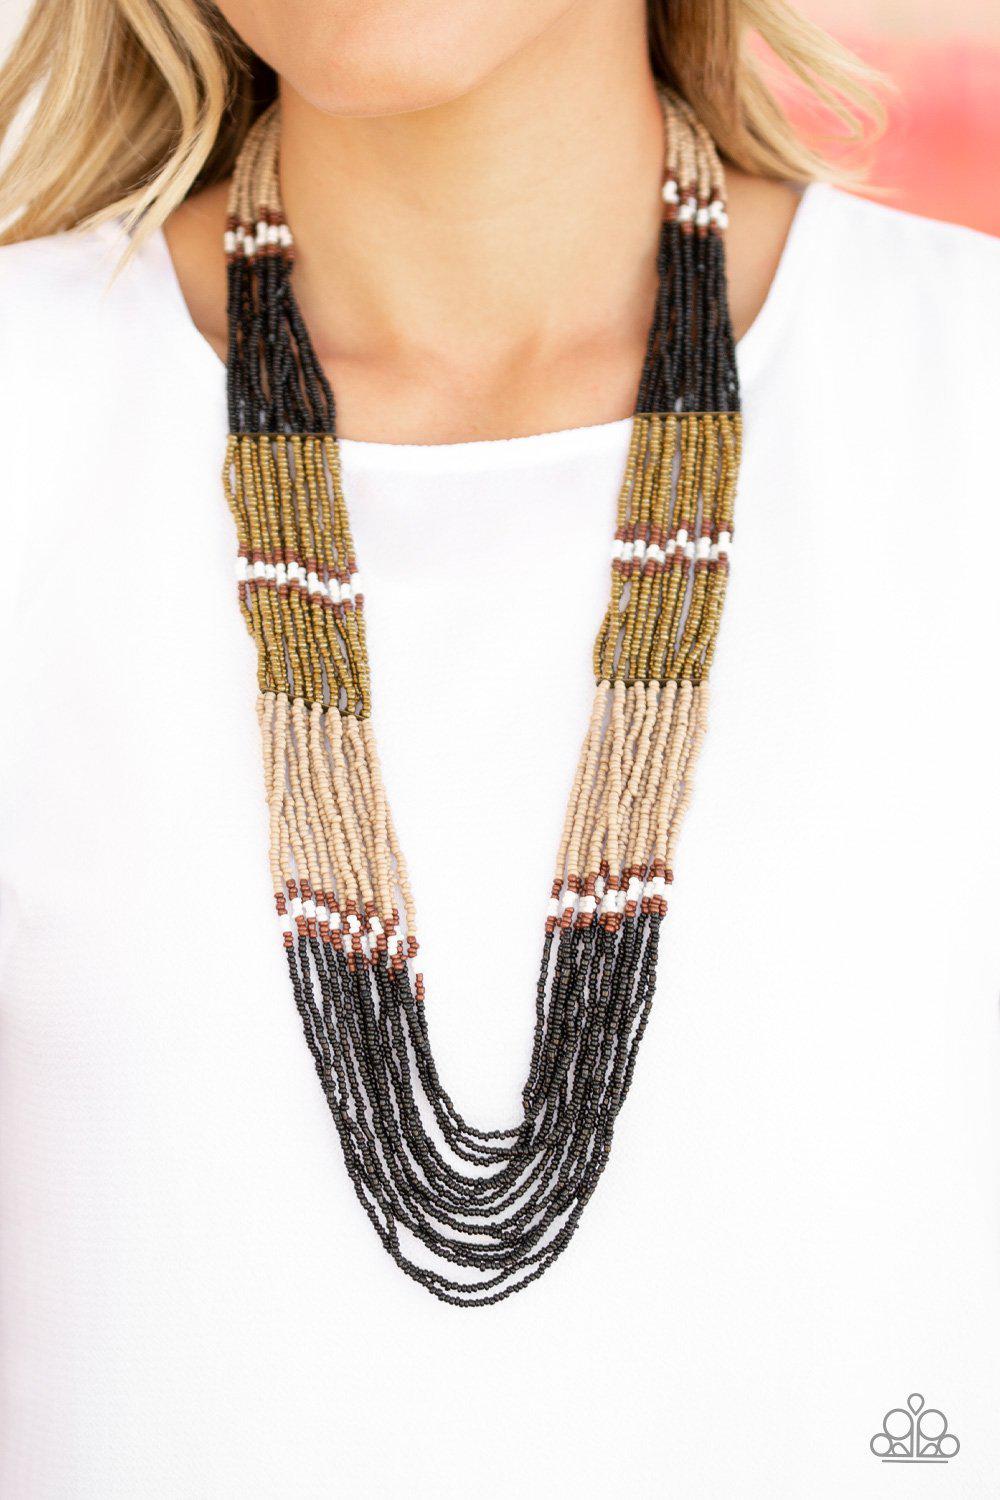 Rio Roamer - Black and Tan Seed Bead Necklace and matching Earrings - Paparazzi Accessories-CarasShop.com - $5 Jewelry by Cara Jewels